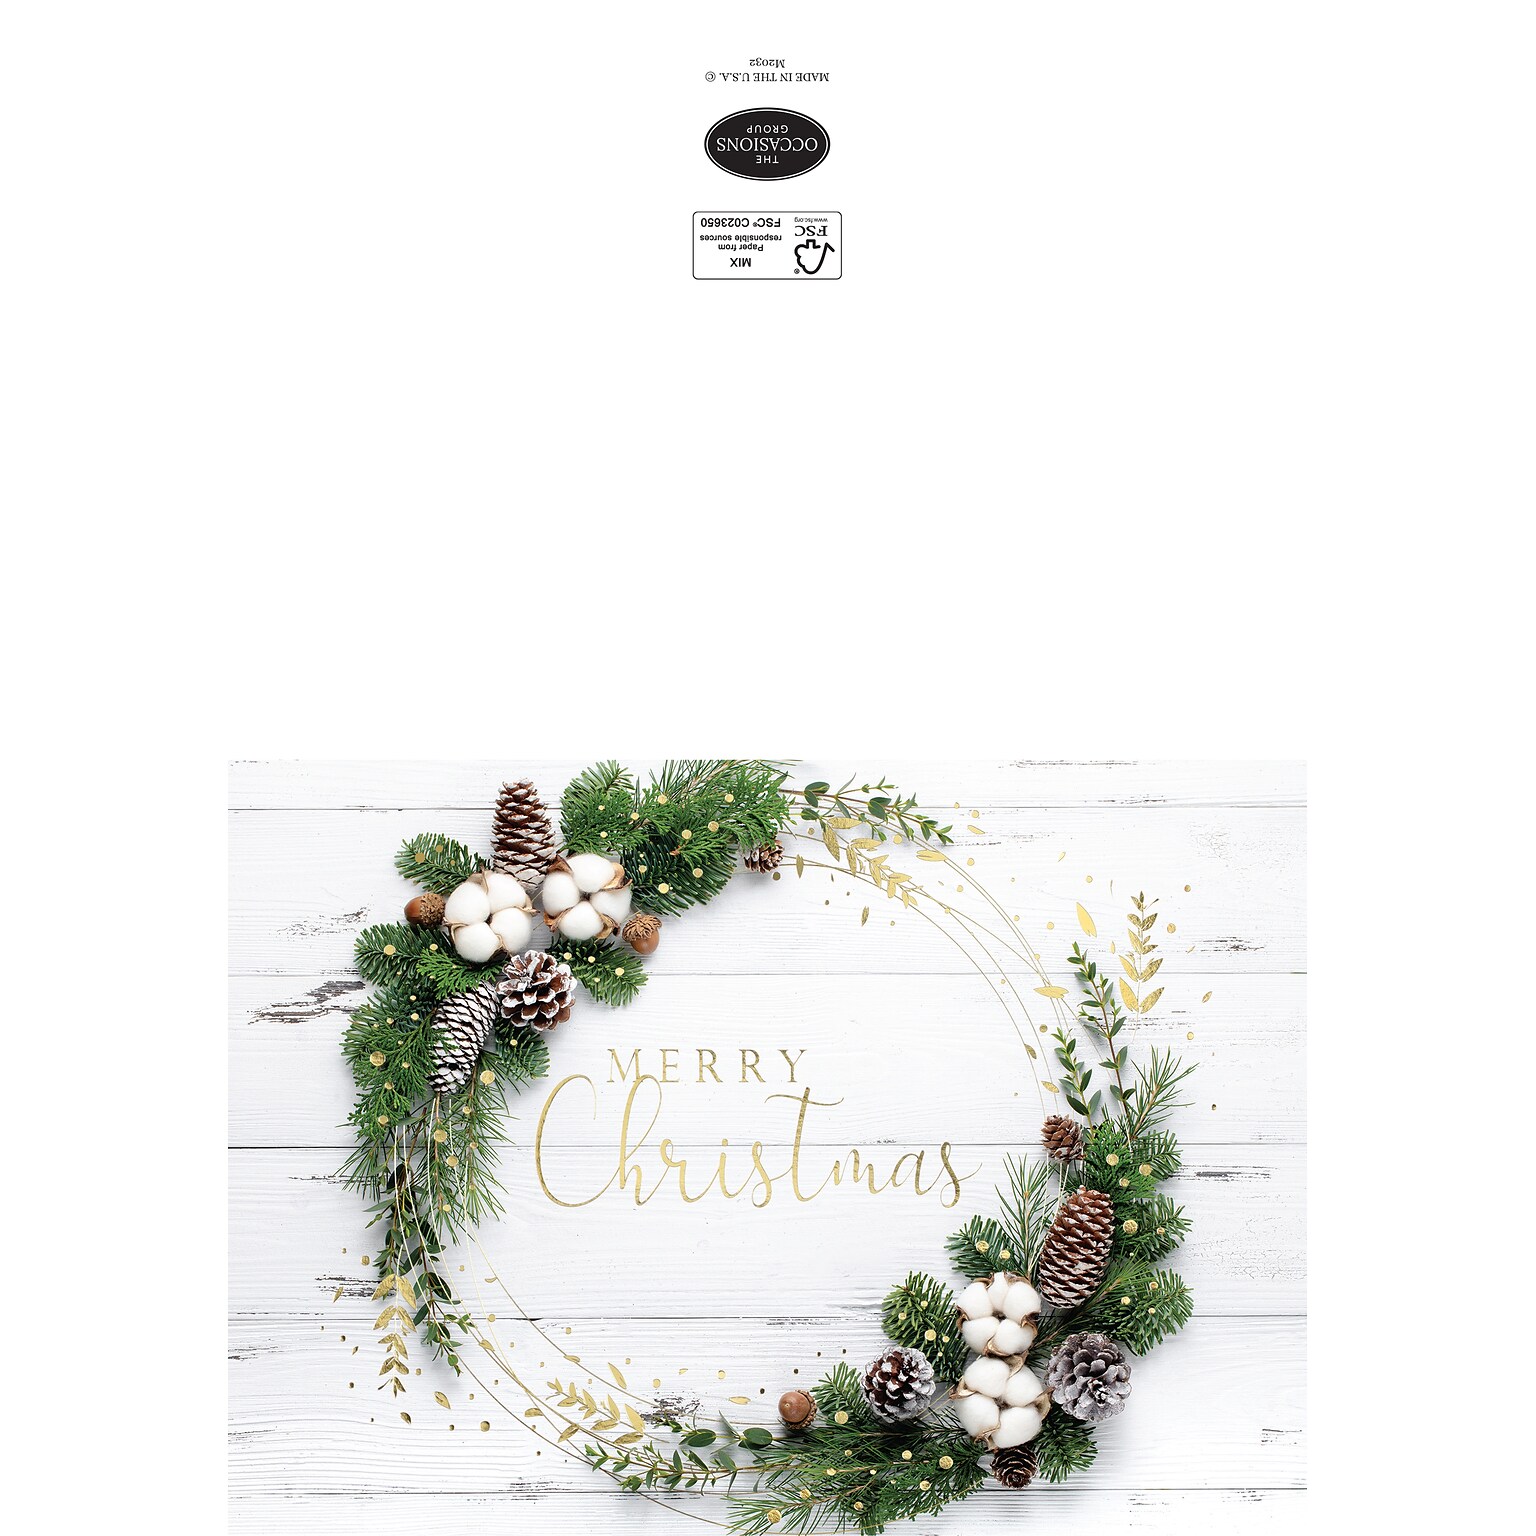 Custom Merry Christmas White Wood Panel With Wreath Cards, with Envelopes, 7-7/8 x 5-5/8, 25 Cards per Set